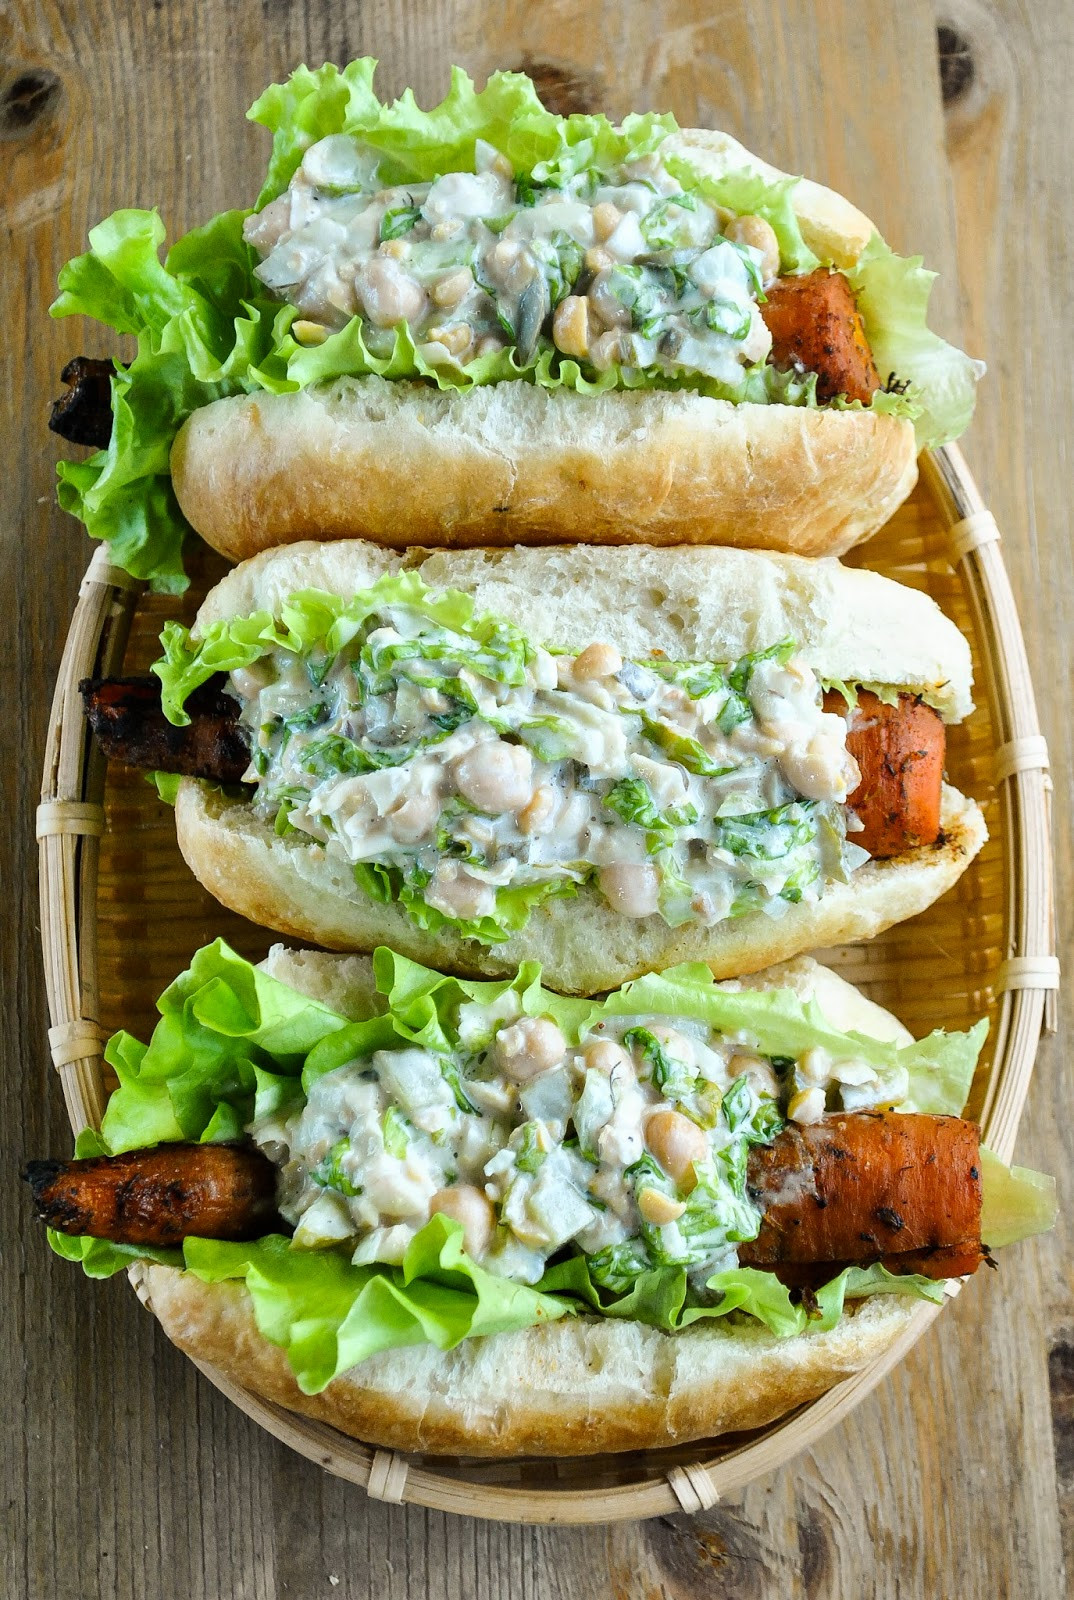 Vegan Hot Dogs
 Smoky barbecue carrot hot dogs with creamy chickpea salad